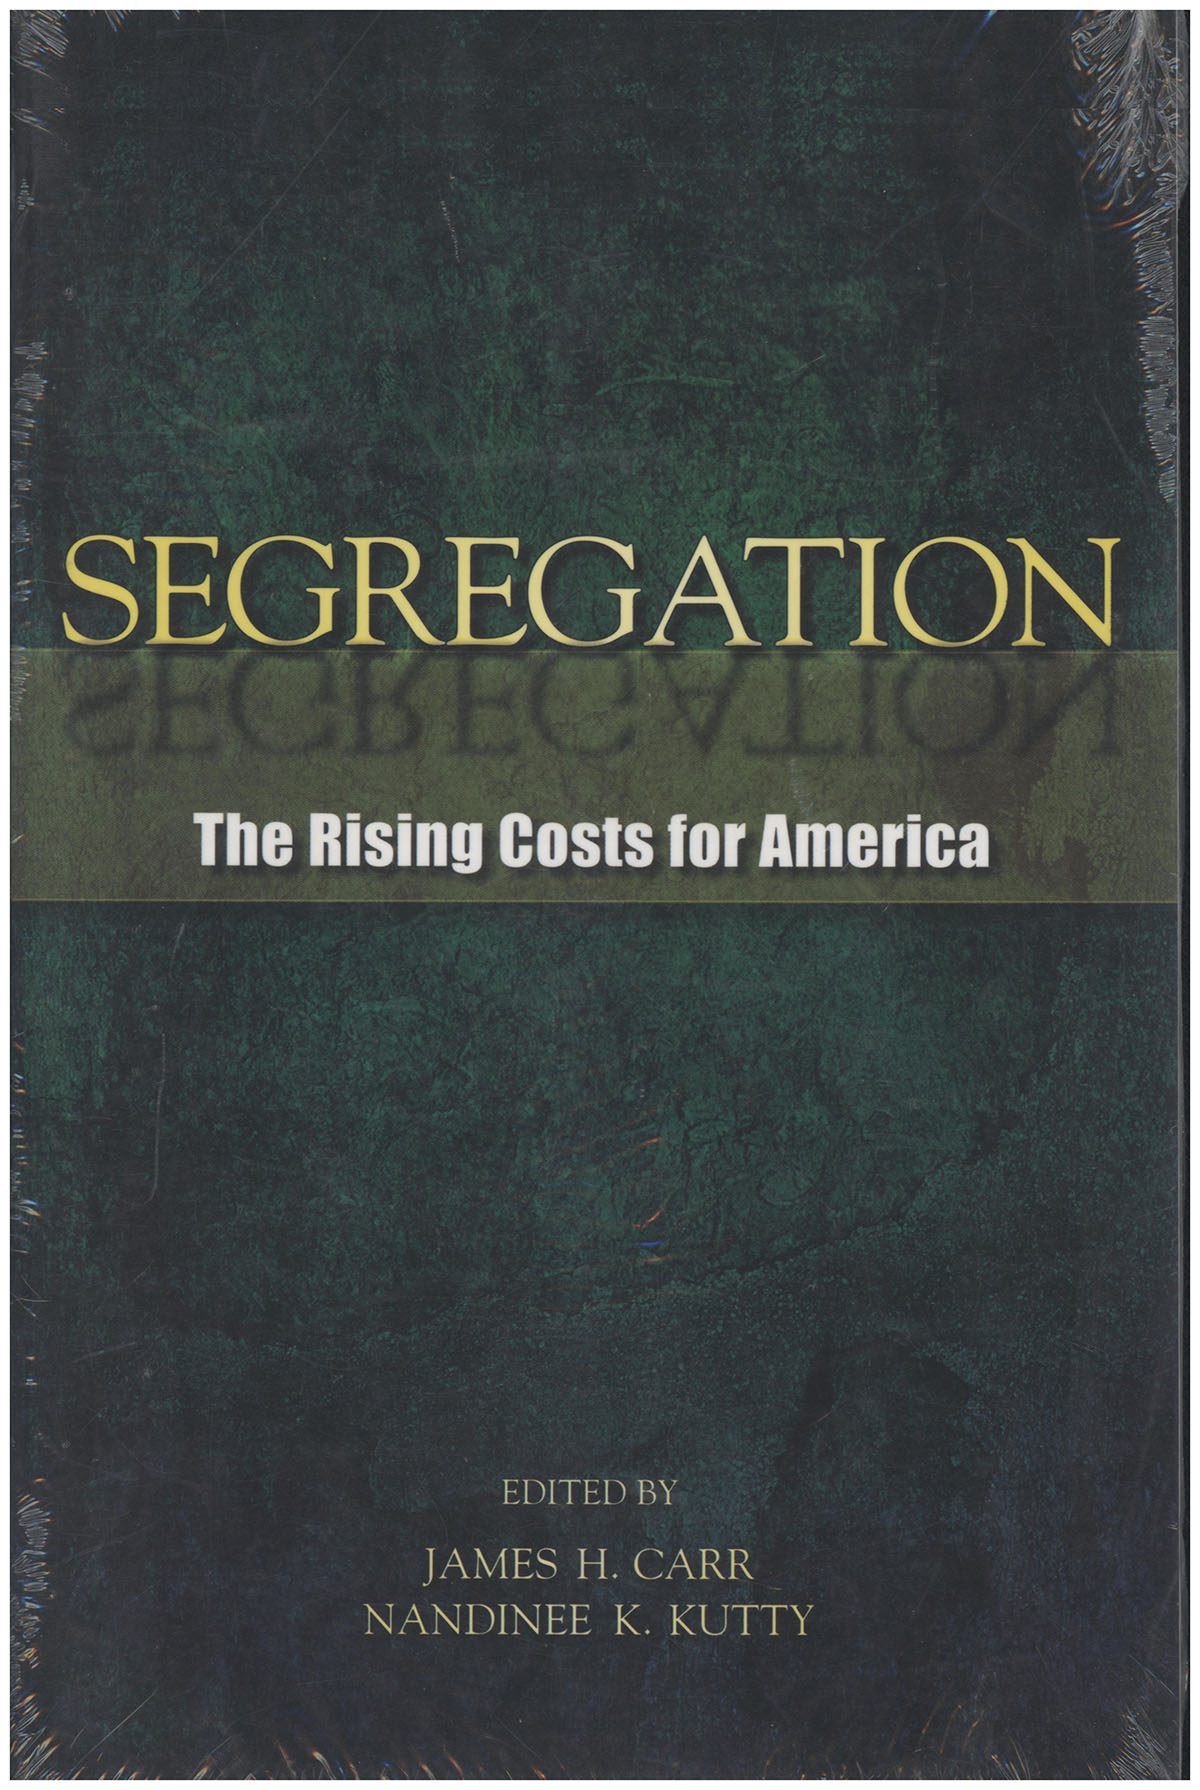 Carr, James H.; Kutty, Nandinee K. (editors) - Segregation: The Rising Costs for America